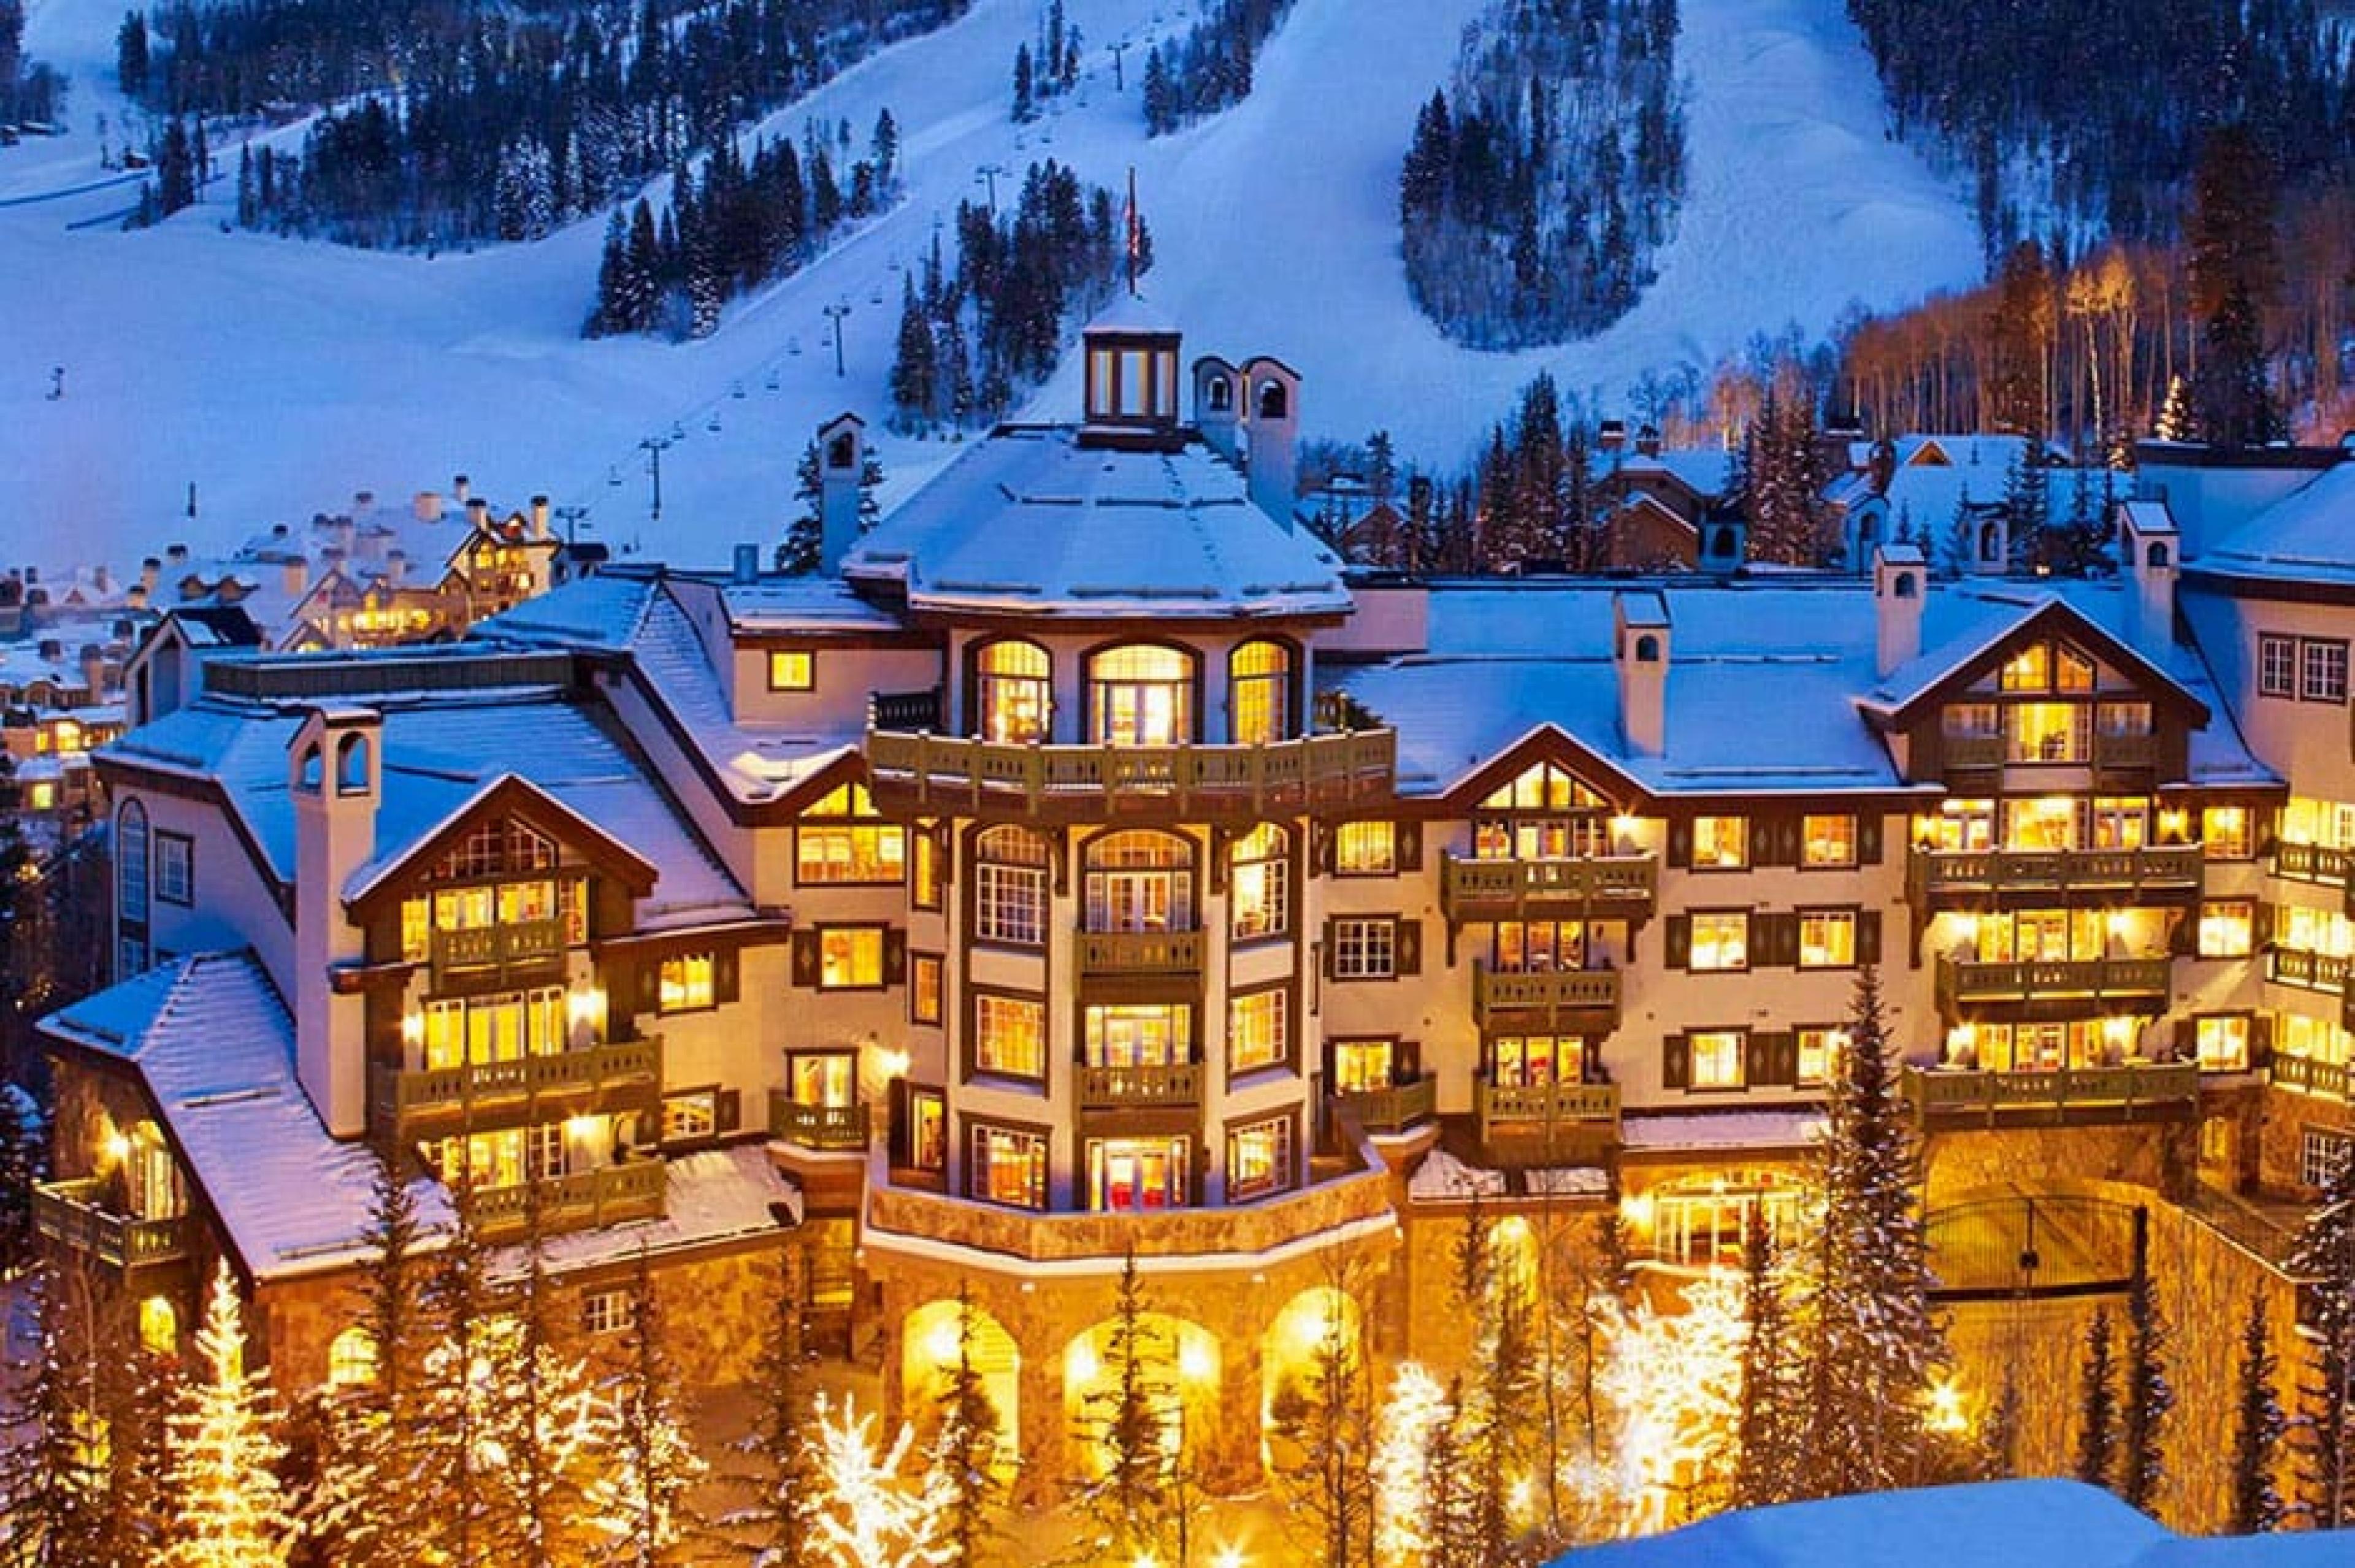 Aerial View : The Chateau Residence Club, Beaver Creek, American West